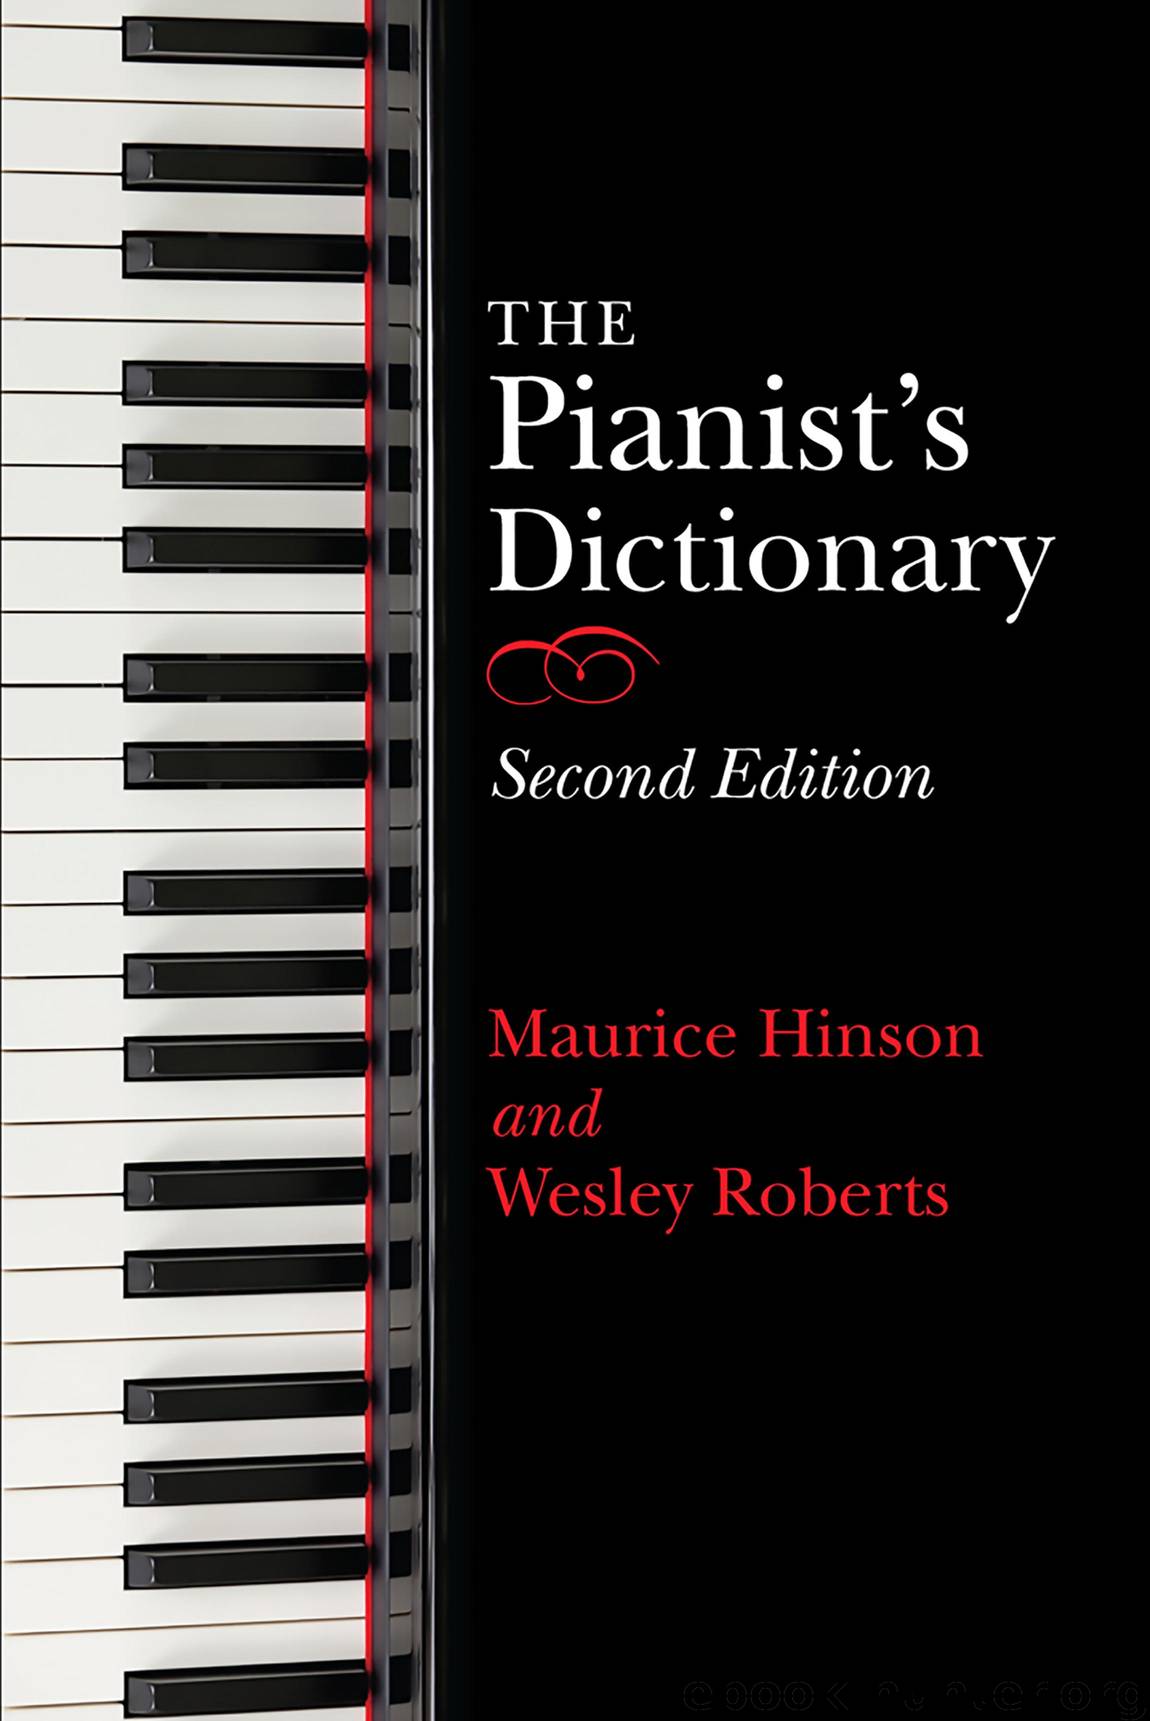 The Pianist's Dictionary by Maurice Hinson